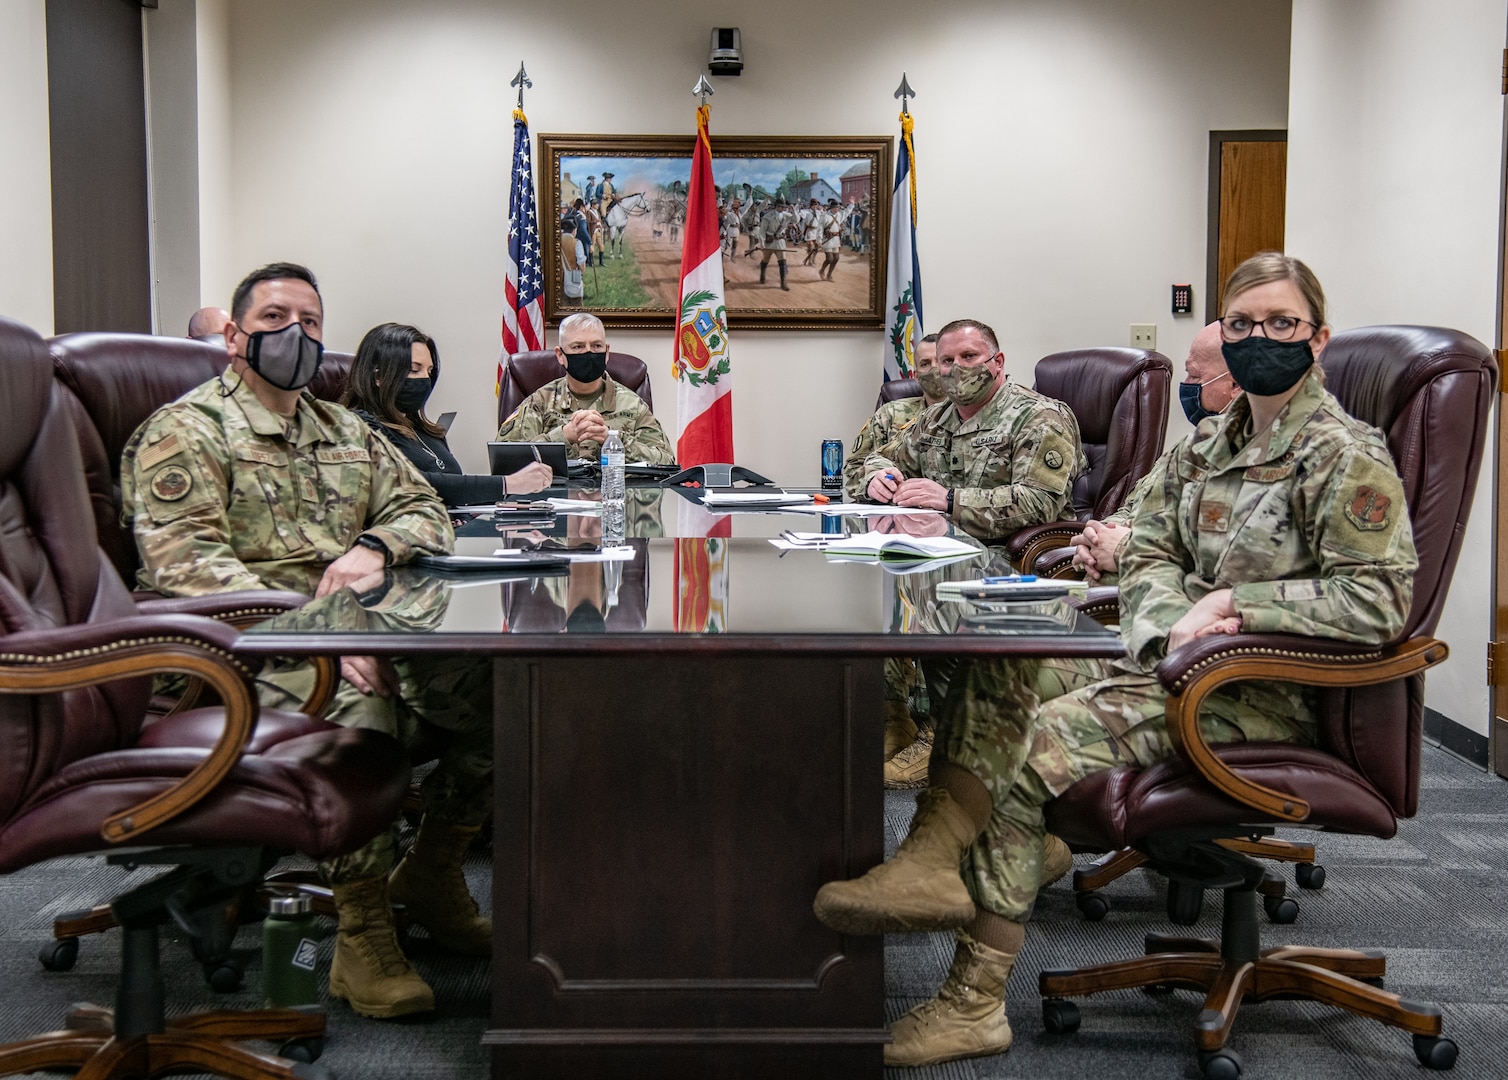 Members of the West Virginia National Guard and the West Virginia Joint Interagency Task Force for COVID-19 Vaccines shared best practices and lessons learned for COVID-19 vaccine distribution with Peru during a virtual workshop held March 2, 2021. The purpose of the workshop, built upon the established SPP relationship between the WVNG and Peru, was to assist Peru in overcoming obstacles and challenges facing their nation as they begin vaccinating their population. (U.S. Army National Guard photo by Edwin L. Wriston)